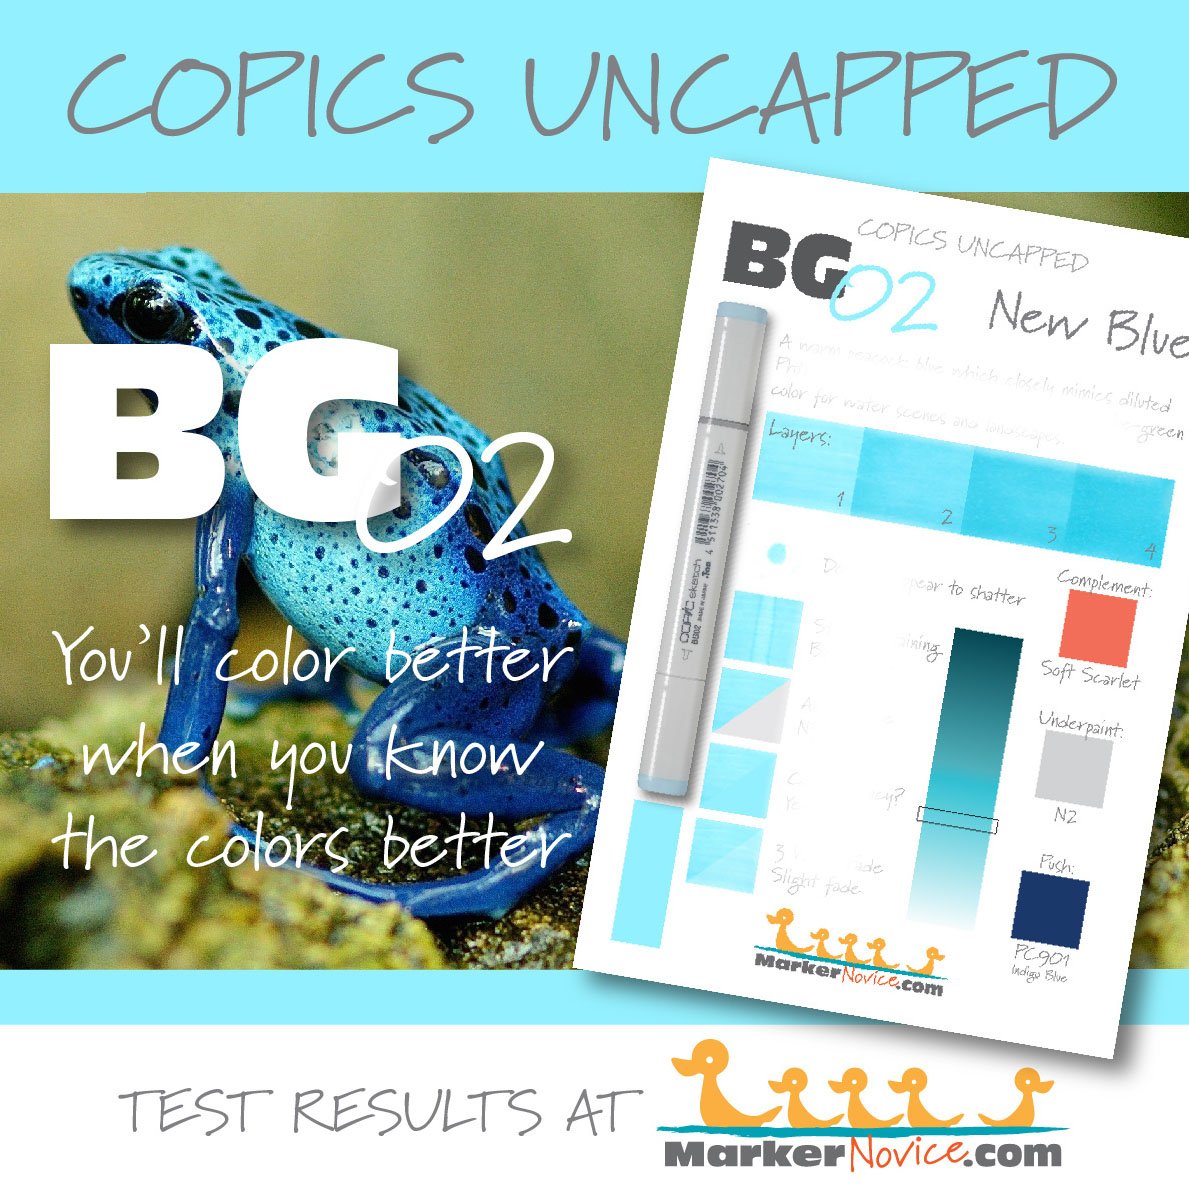 BG02 New Blue: Copics Uncapped (Marker Swatch, Ink Testing